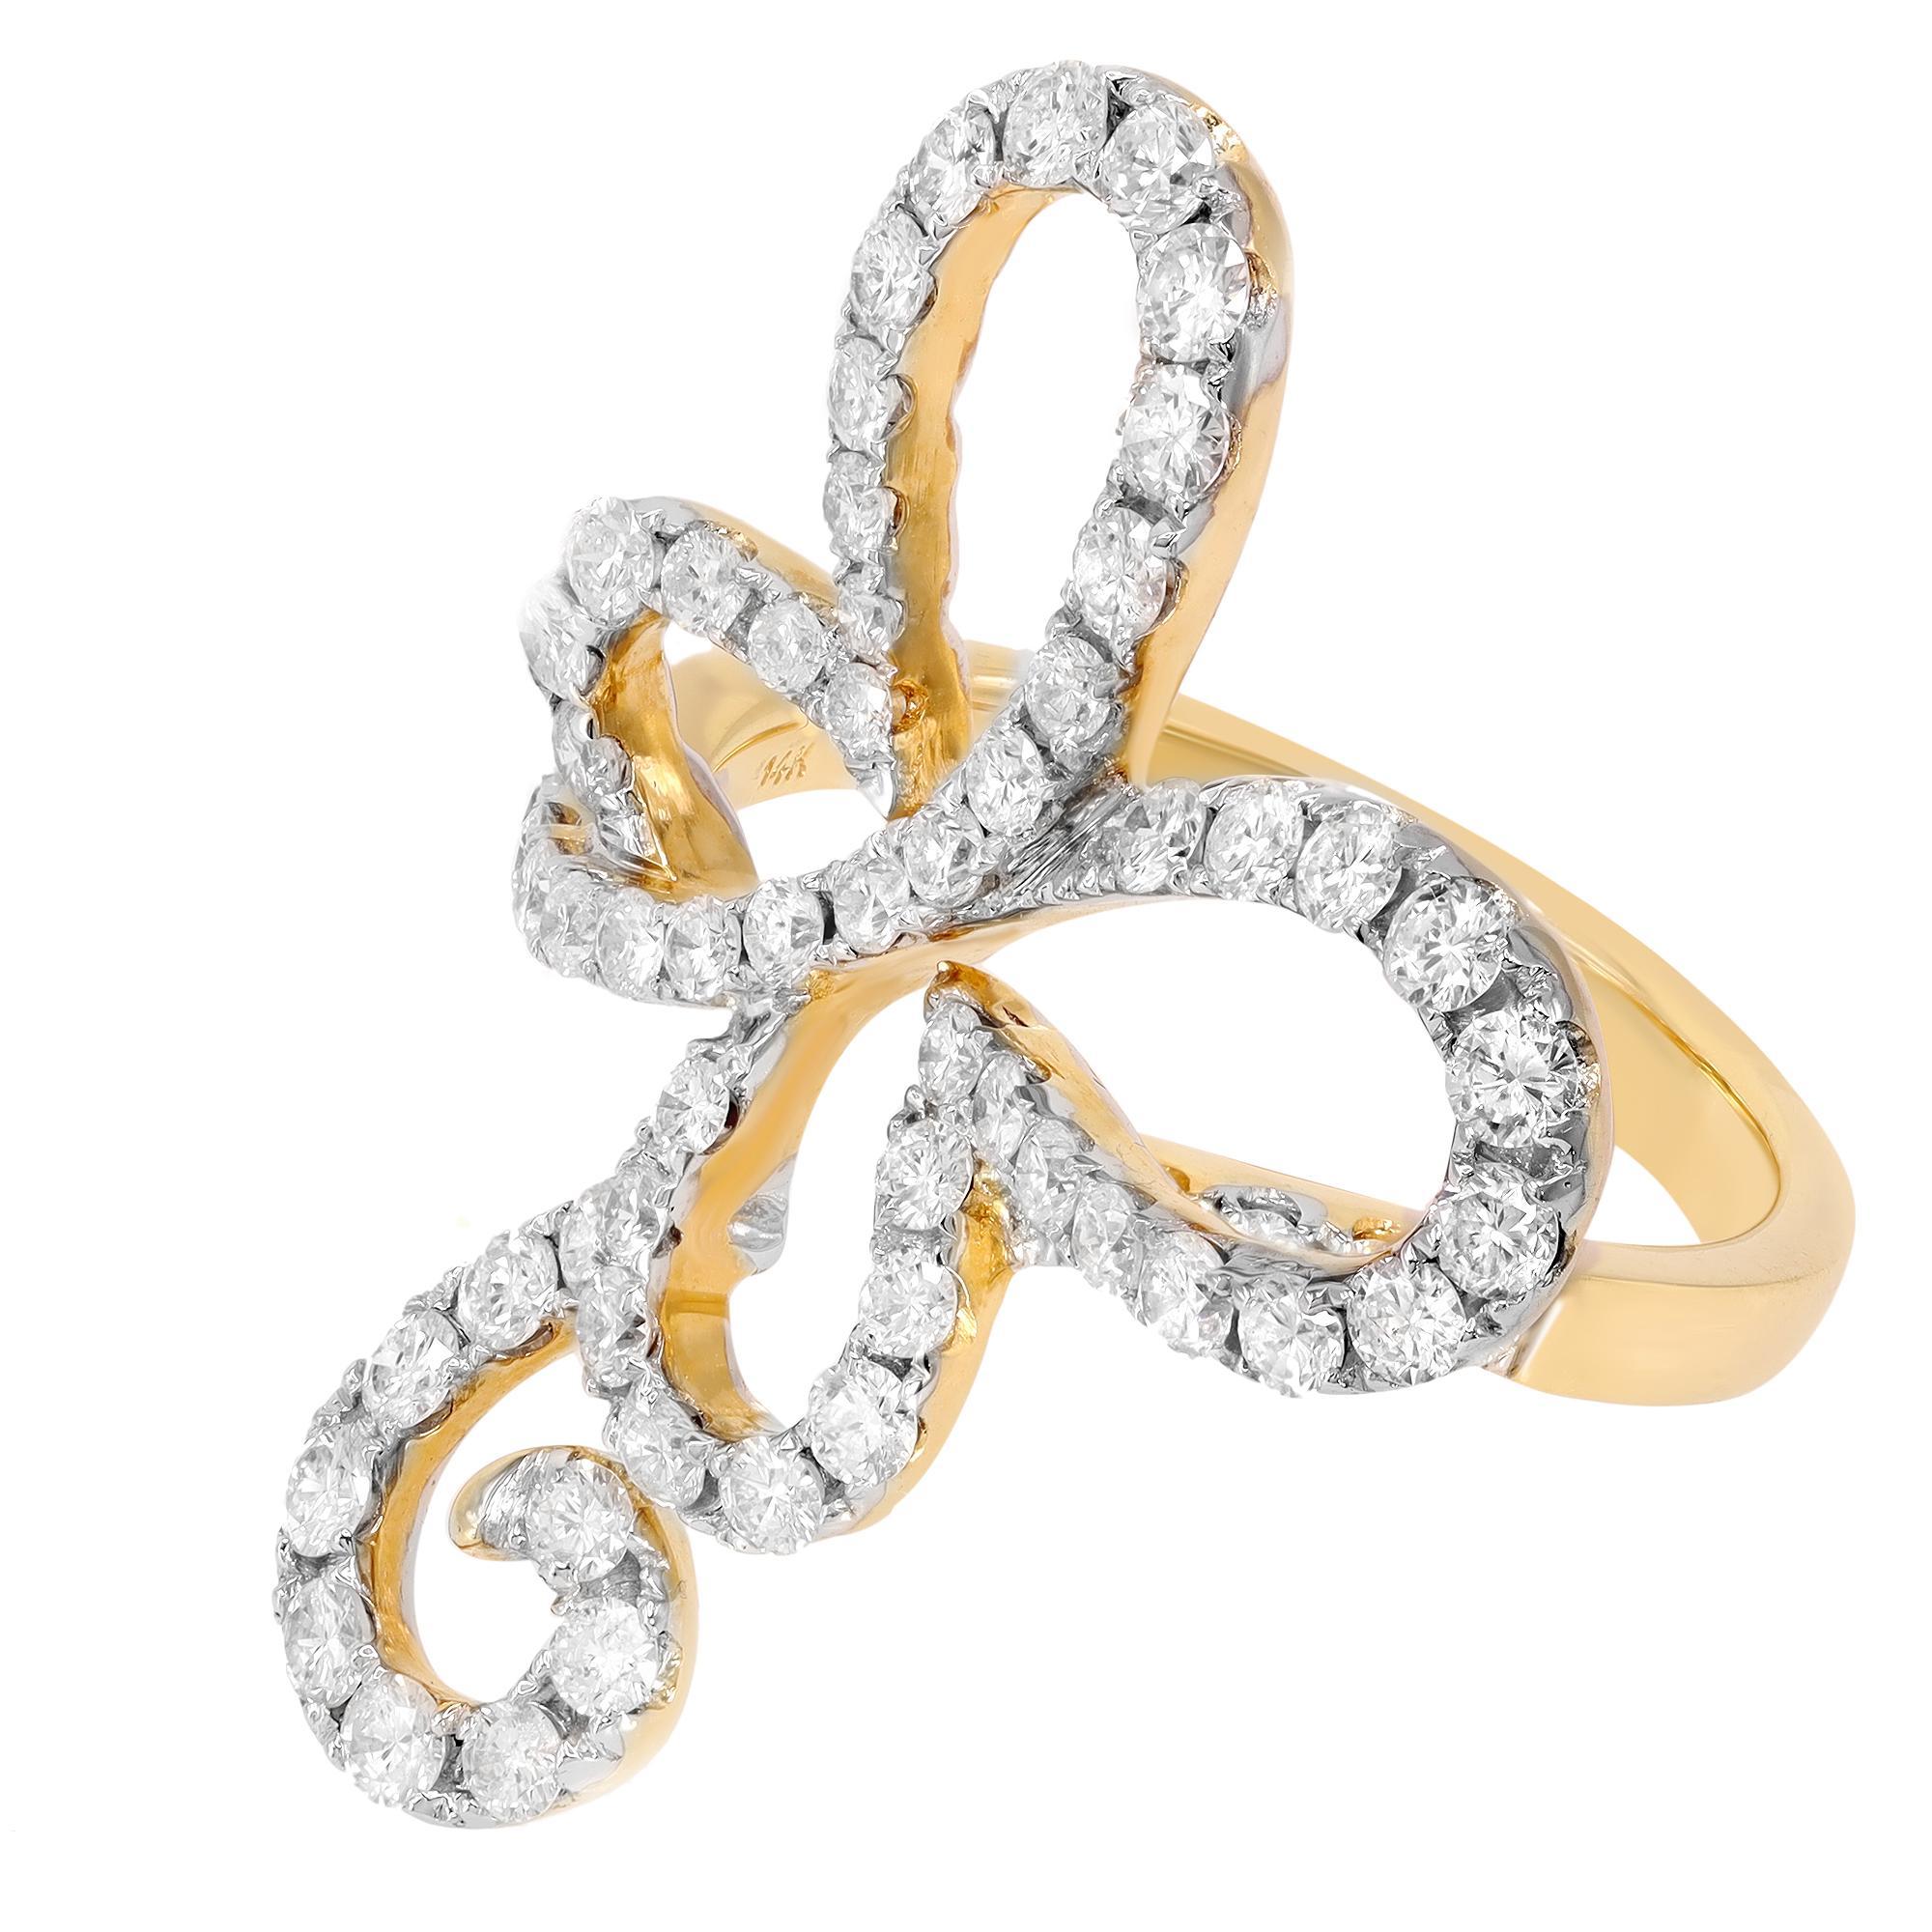 Bold and beautiful butterfly cocktail diamond ring crafted in 14k Yellow Gold. This ring features sparkling round cut diamonds weighing 1.6cttw with color G-H and clarity VS-SI. The ring size is 7.25. Comes with a presentable gift box. 